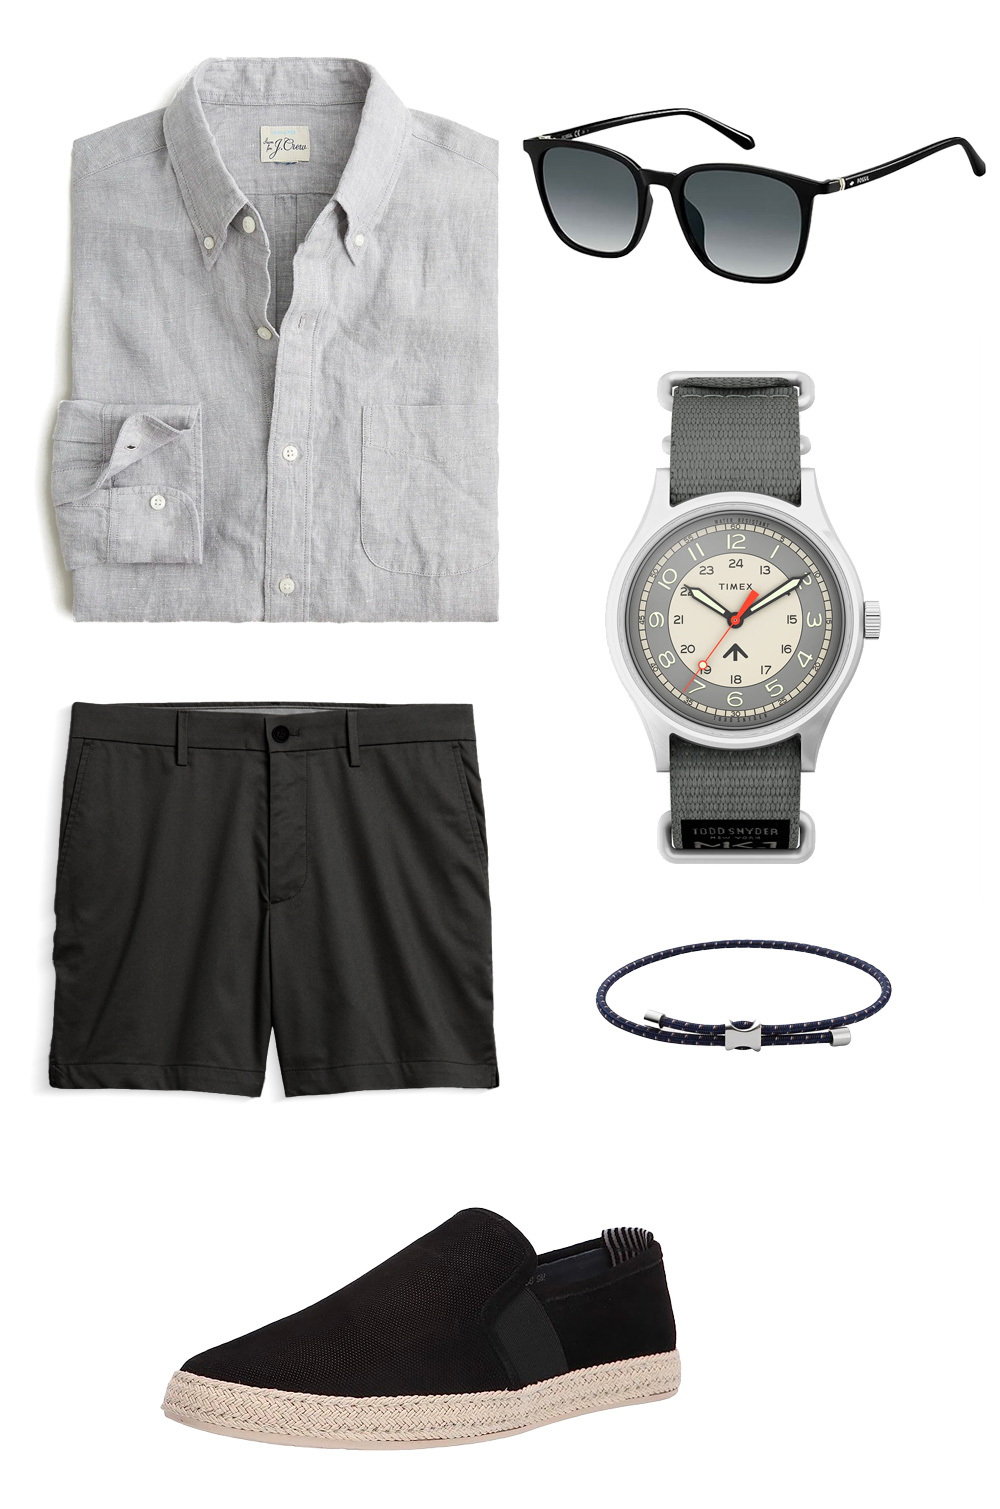 a graphic of assorted monochromatic outfit items including clothing and accessories